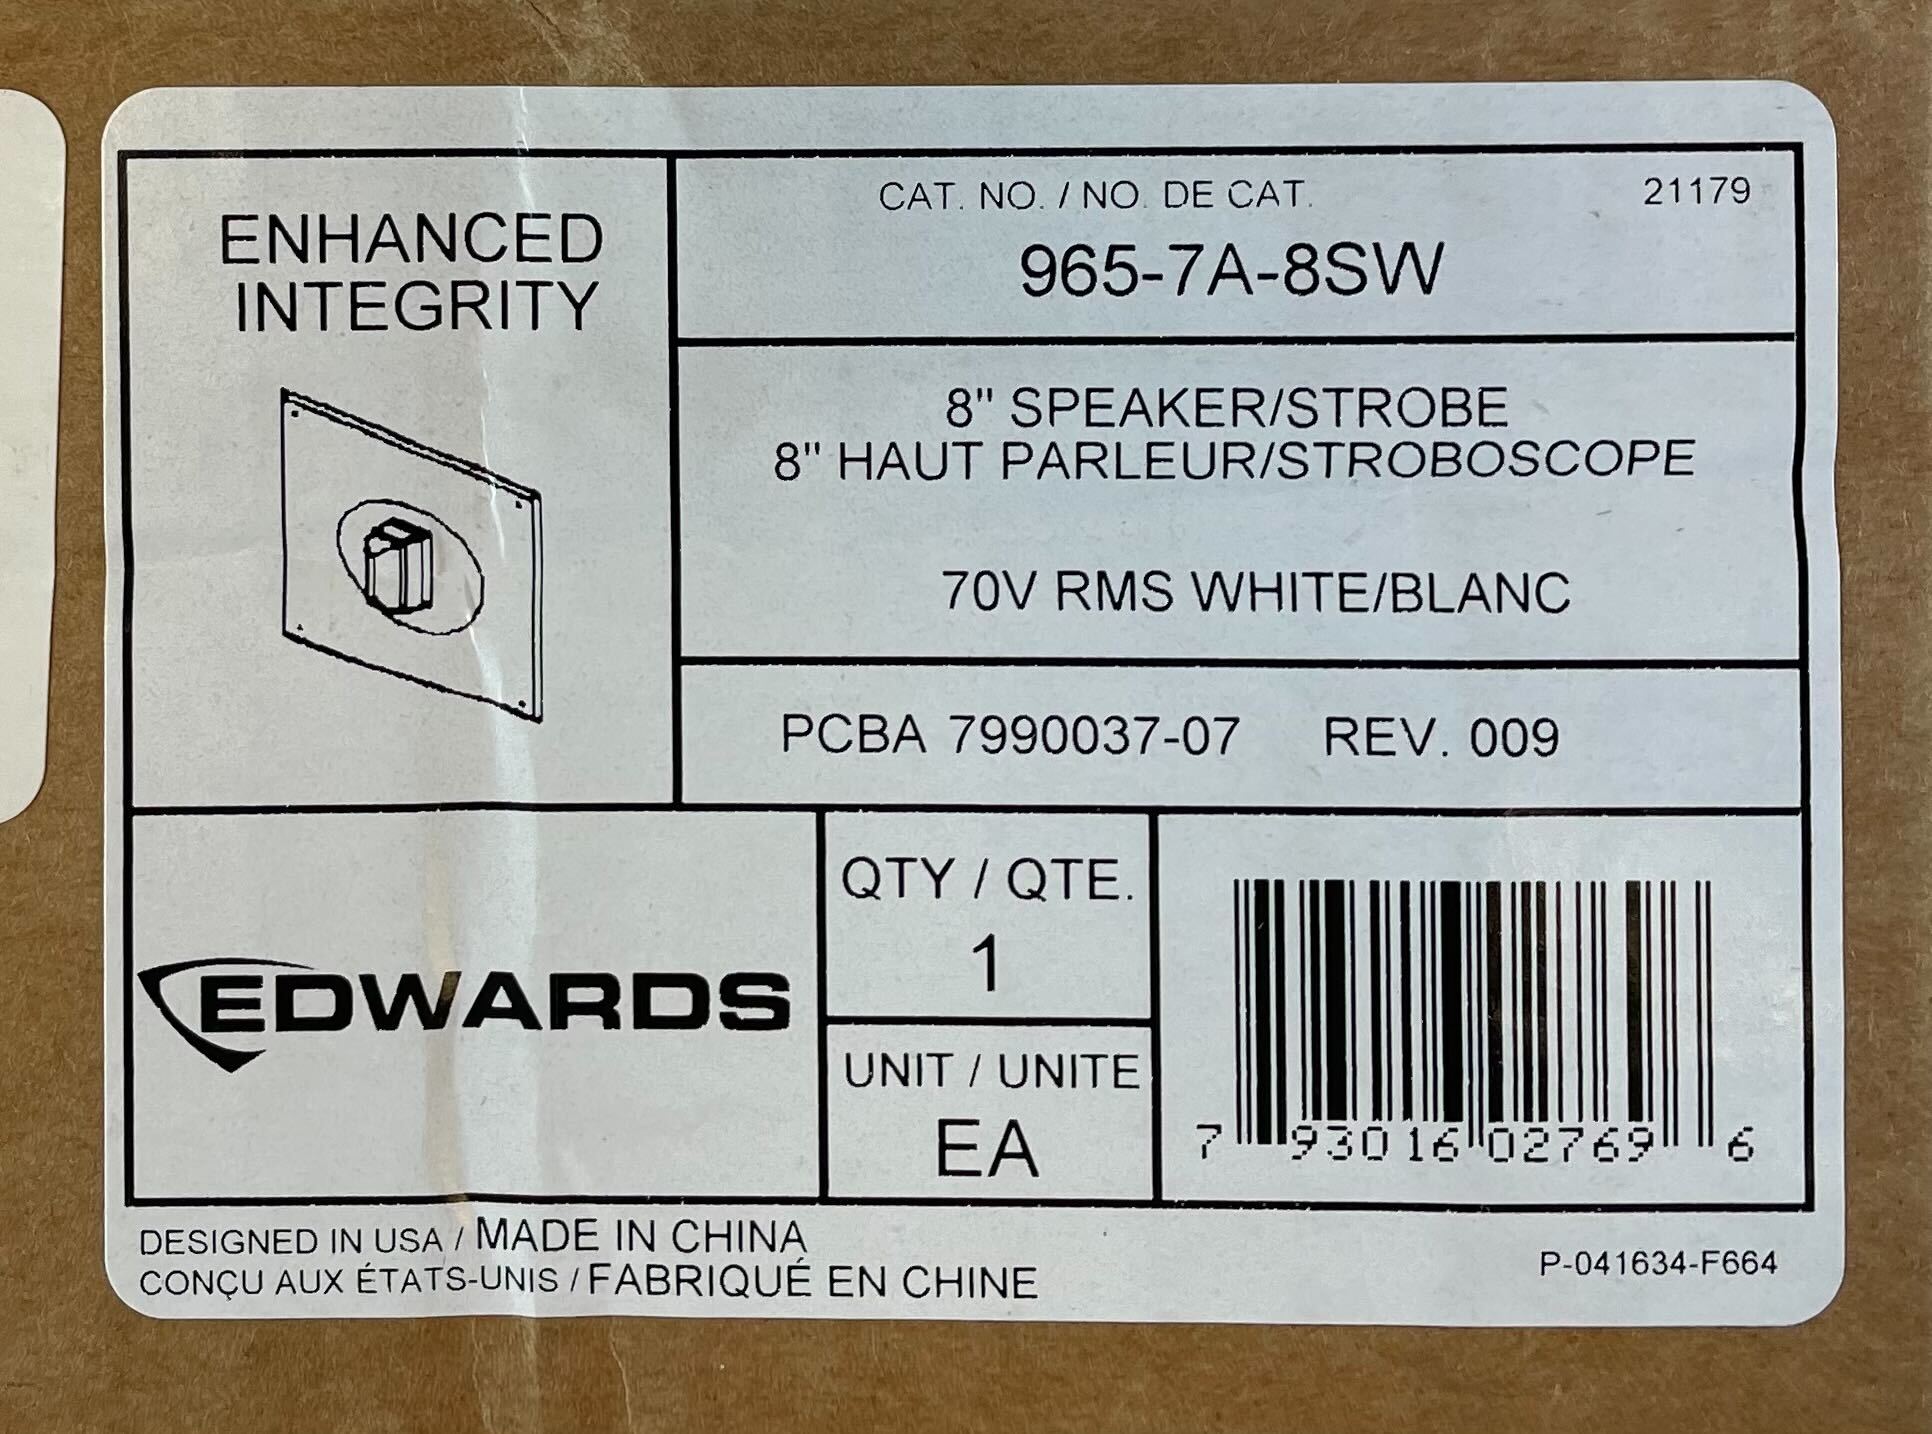 Edwards 965-7A-8SW - The Fire Alarm Supplier